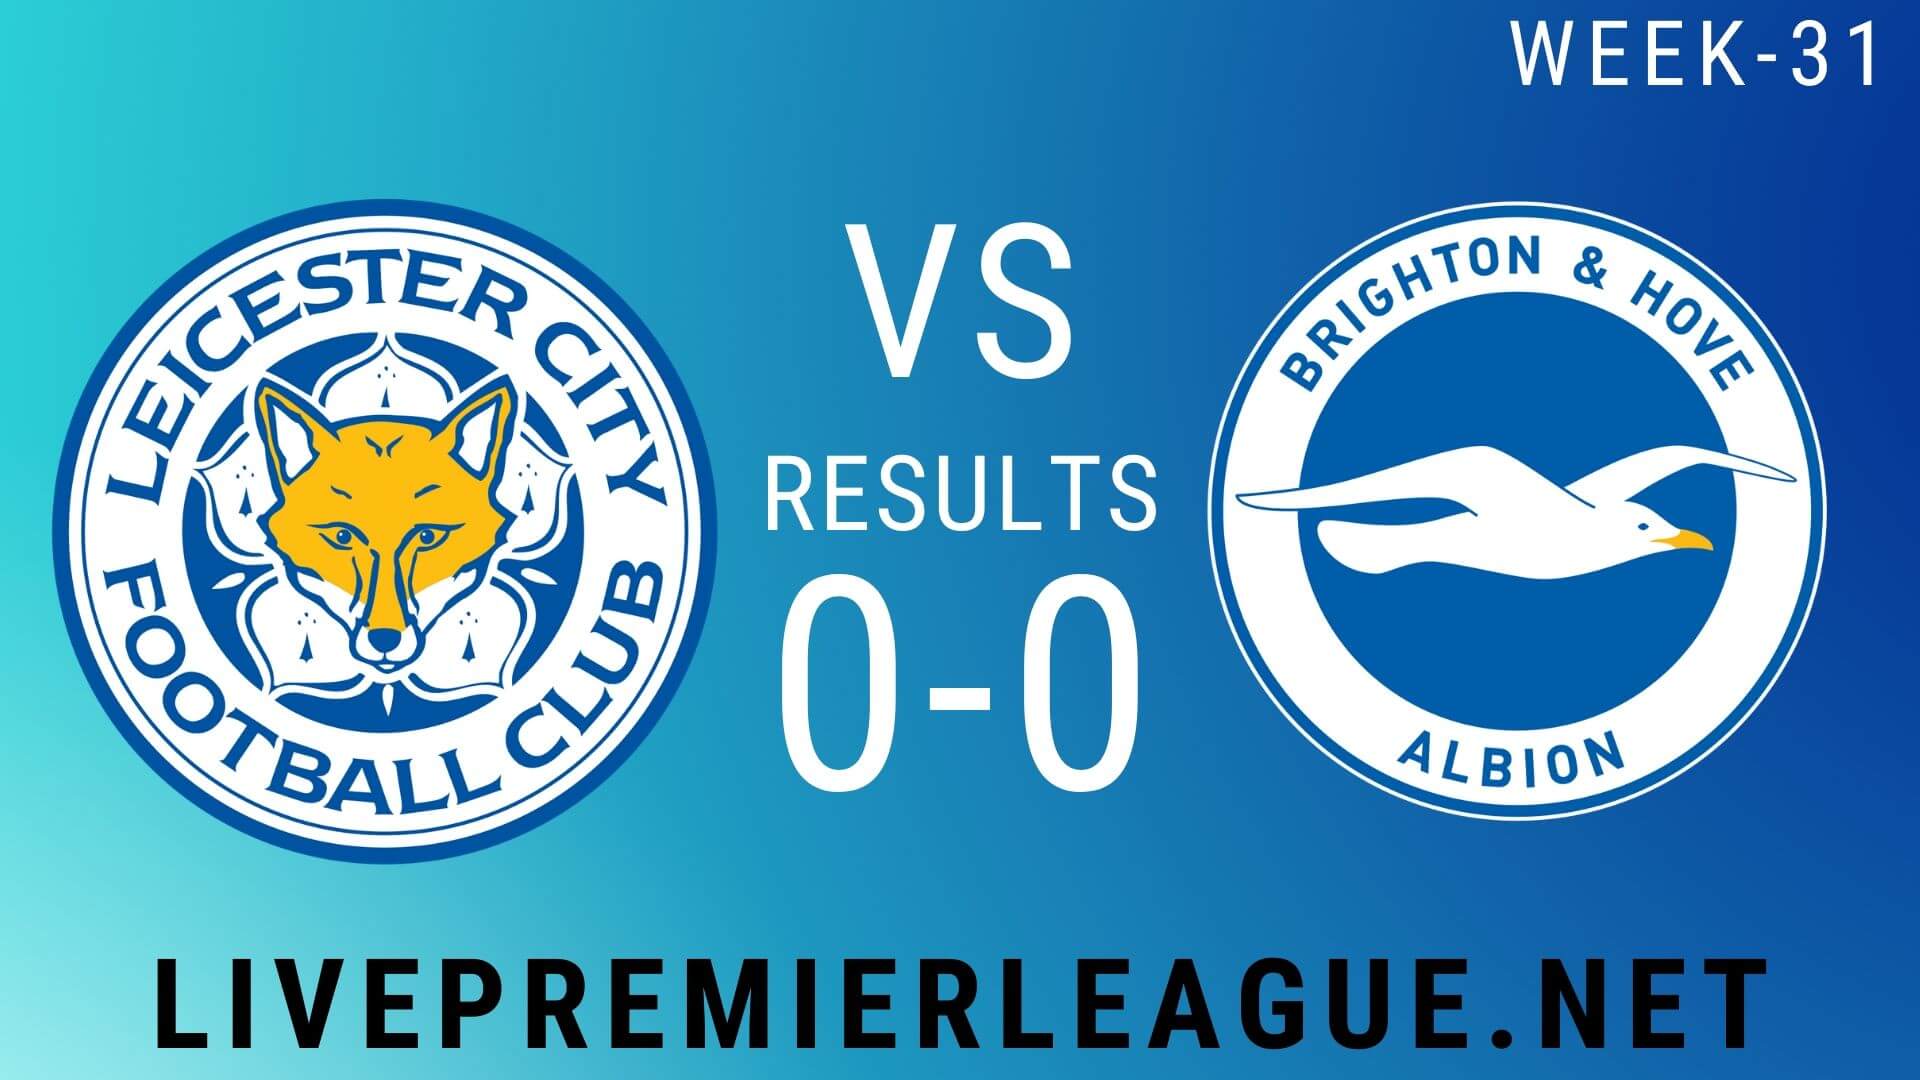 Leicester City Vs Brighton and Hove Albion | Week 31 Result 2020